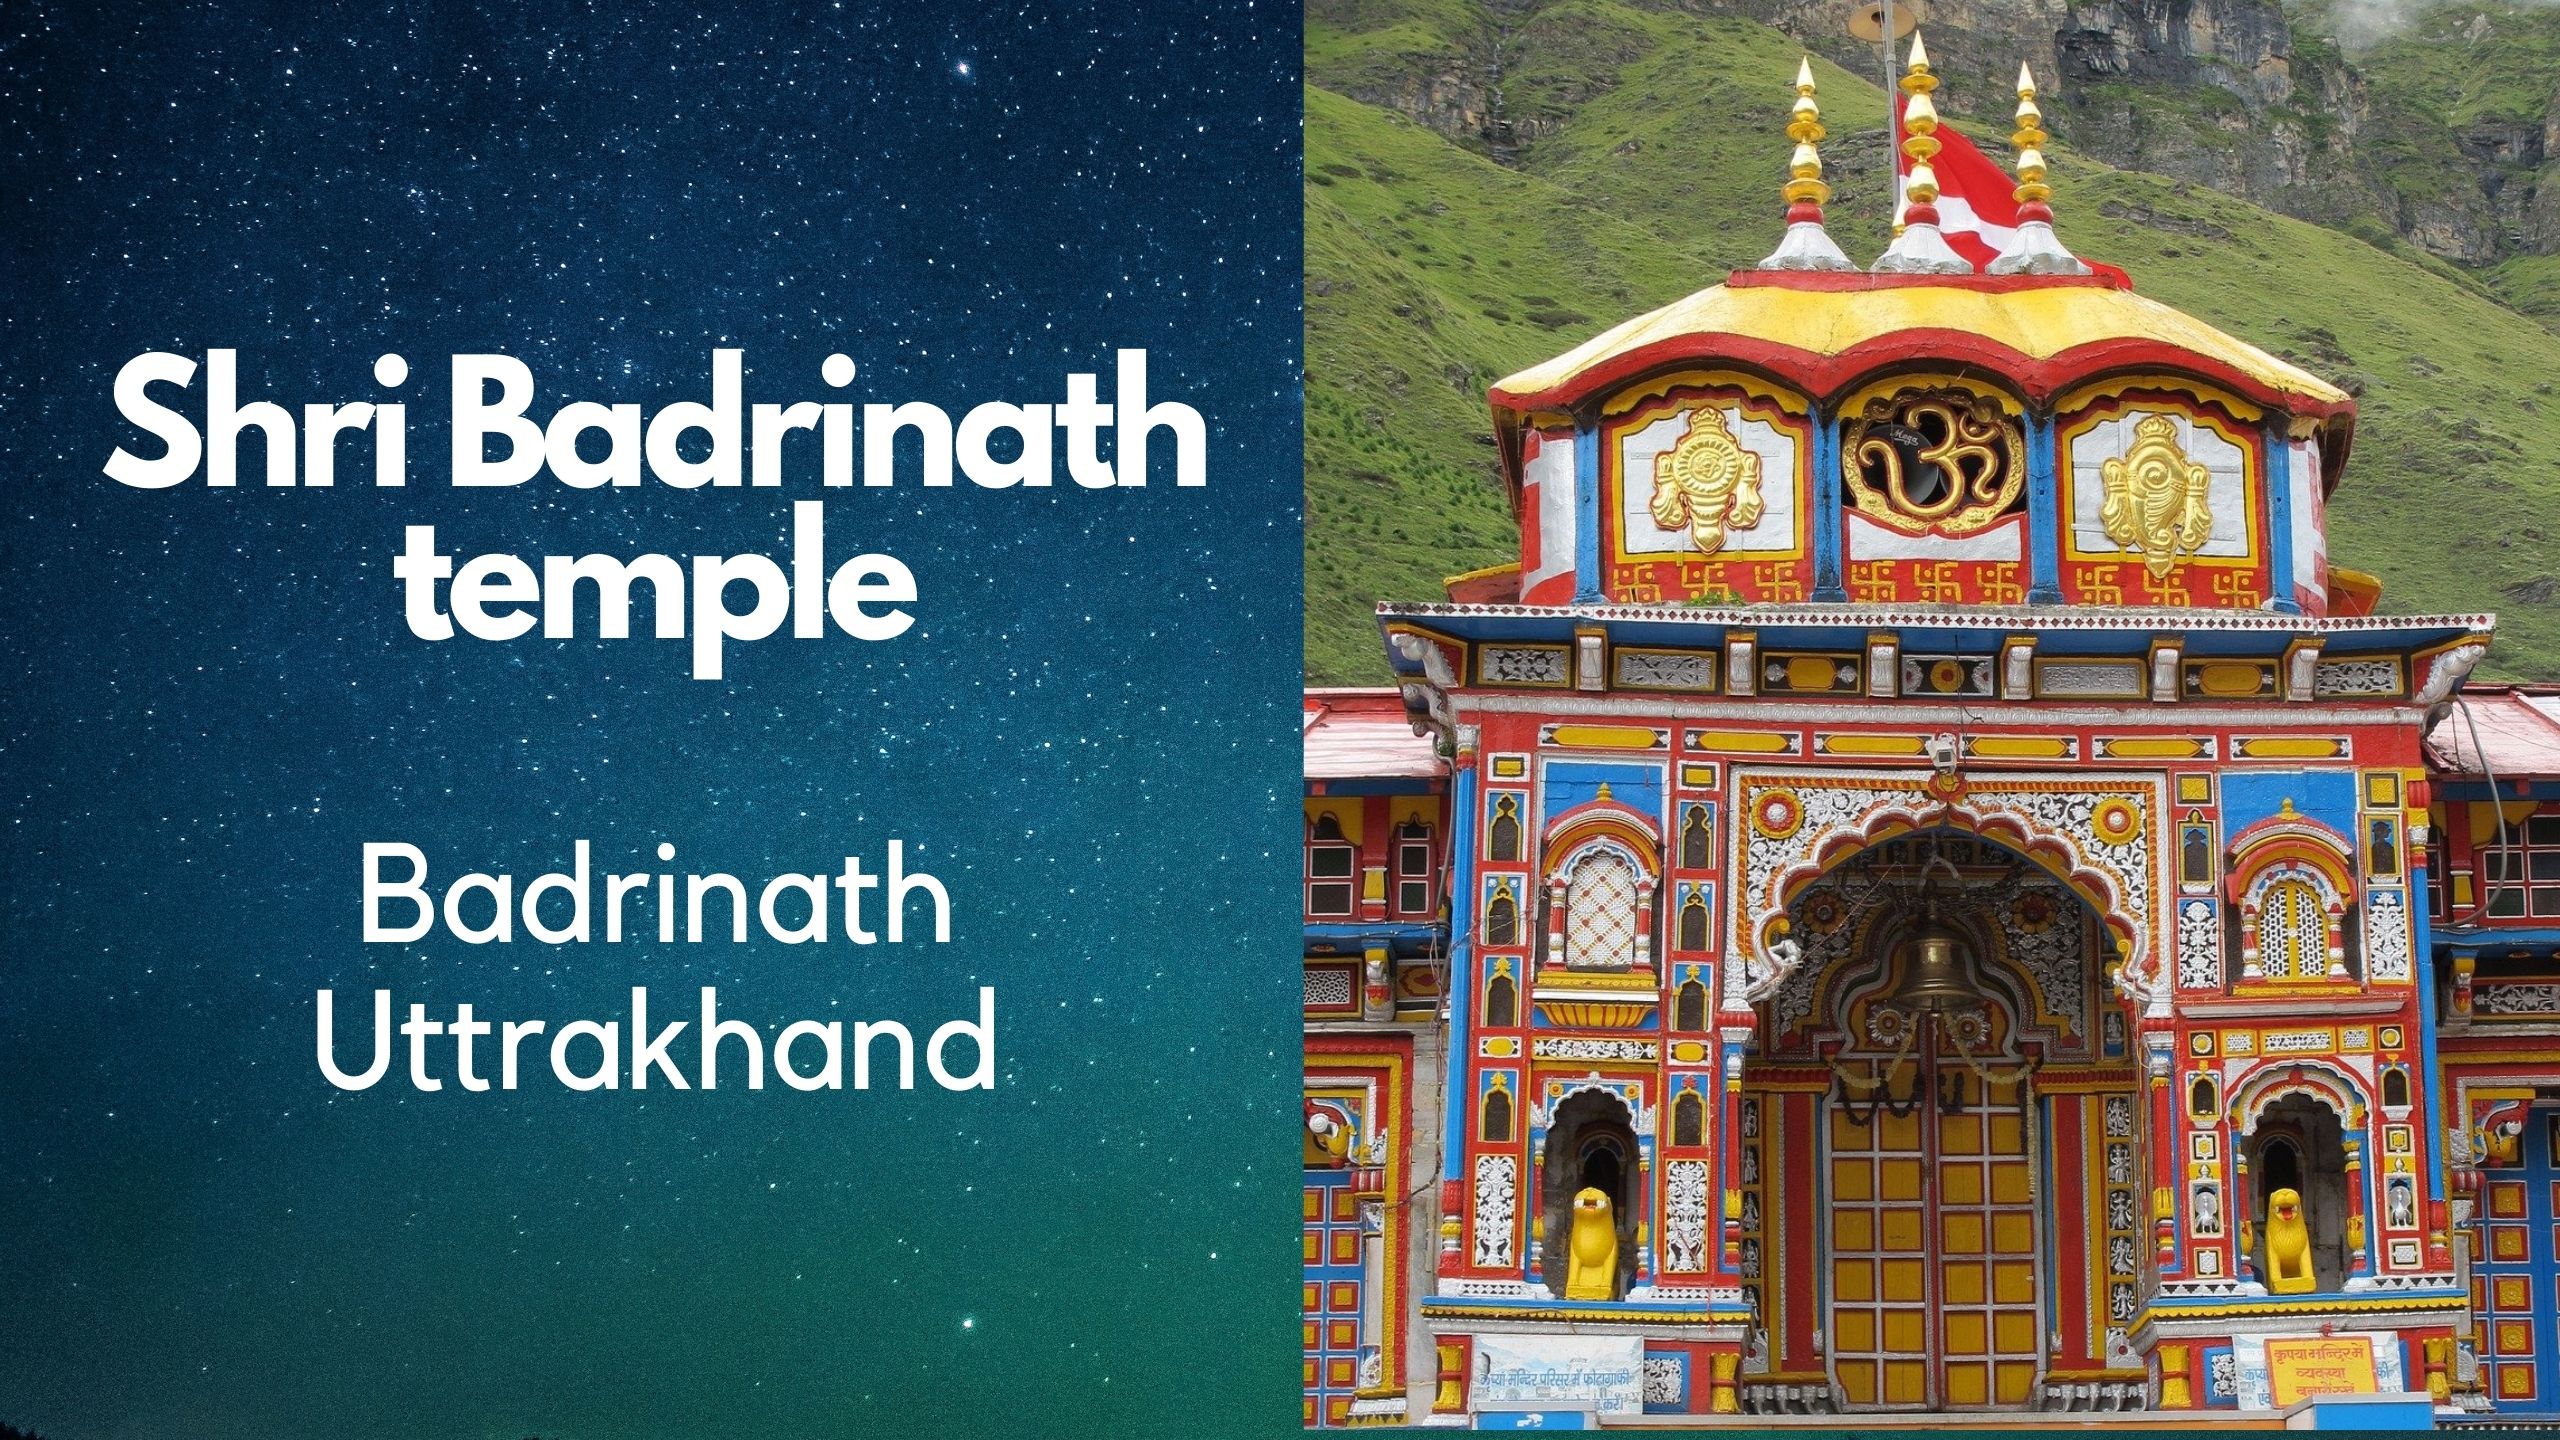 Badrinath temple – Legend, How to reach, Temple timings